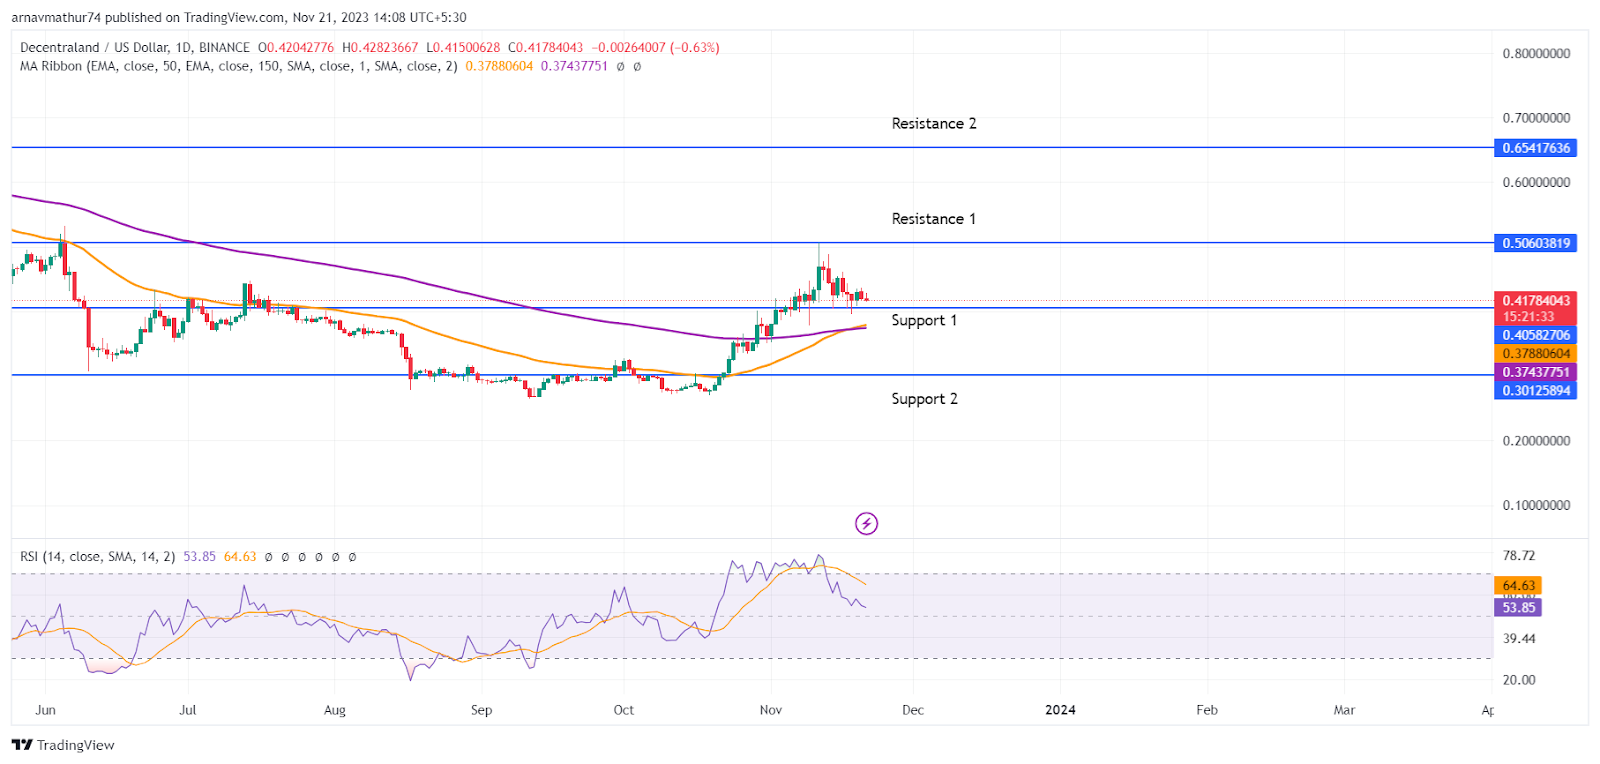 Chainlink Price: Bulls are Regaining Control; Will LINK Reach $20?